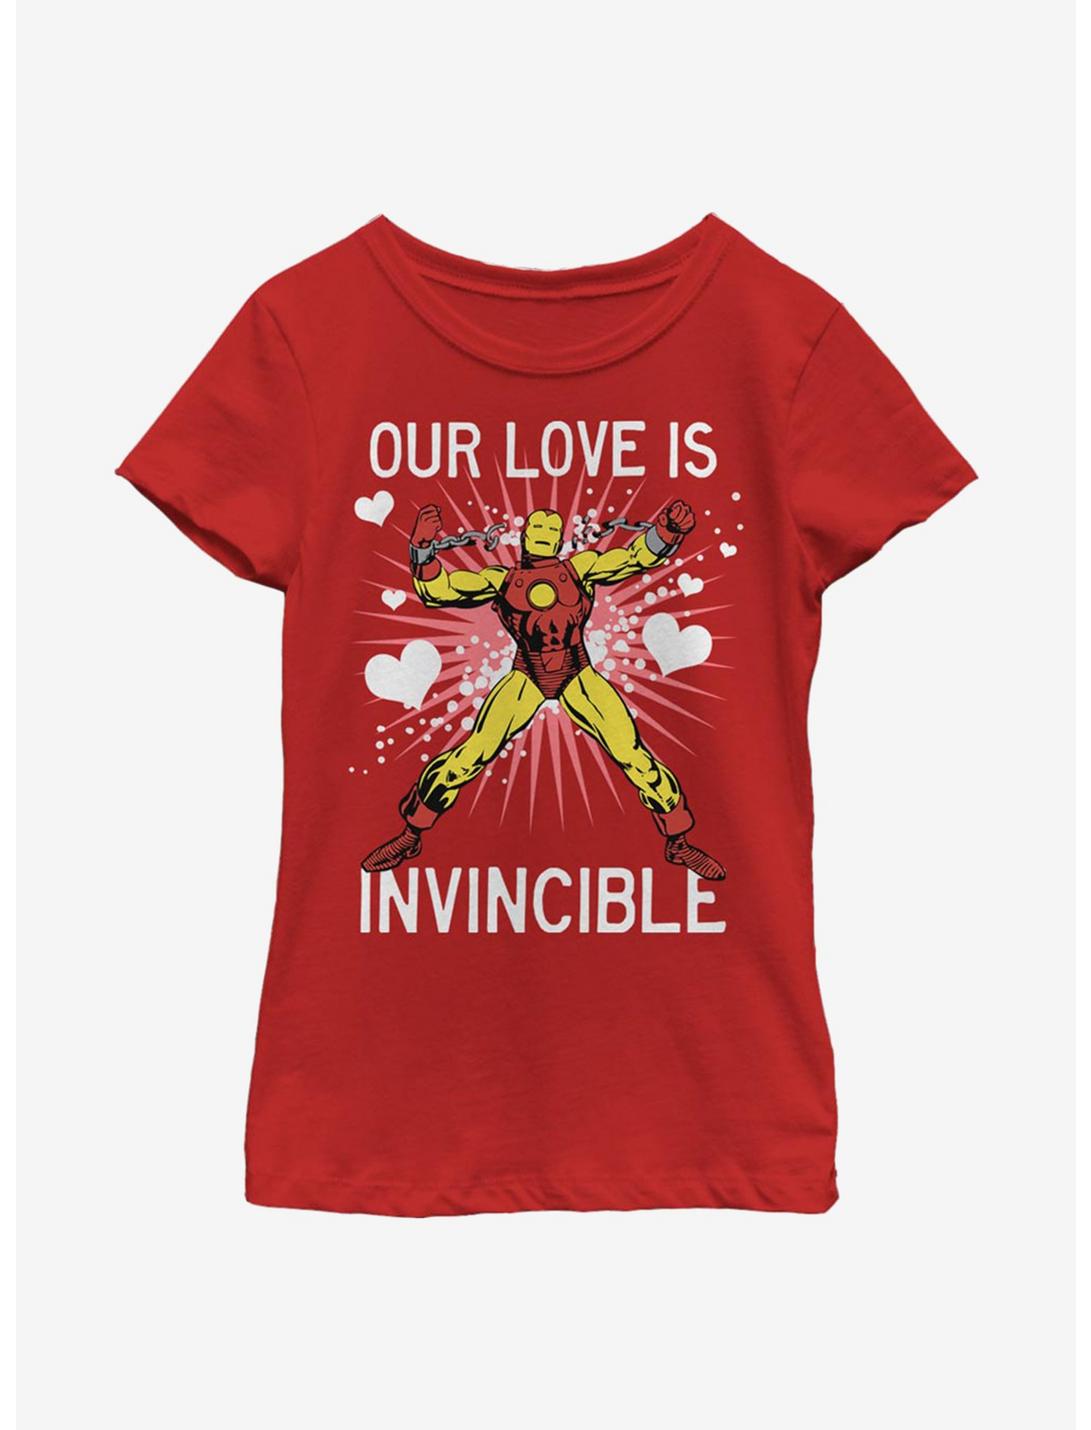 Marvel Iron Man Invincible Love Youth Girls T-Shirt, RED, hi-res